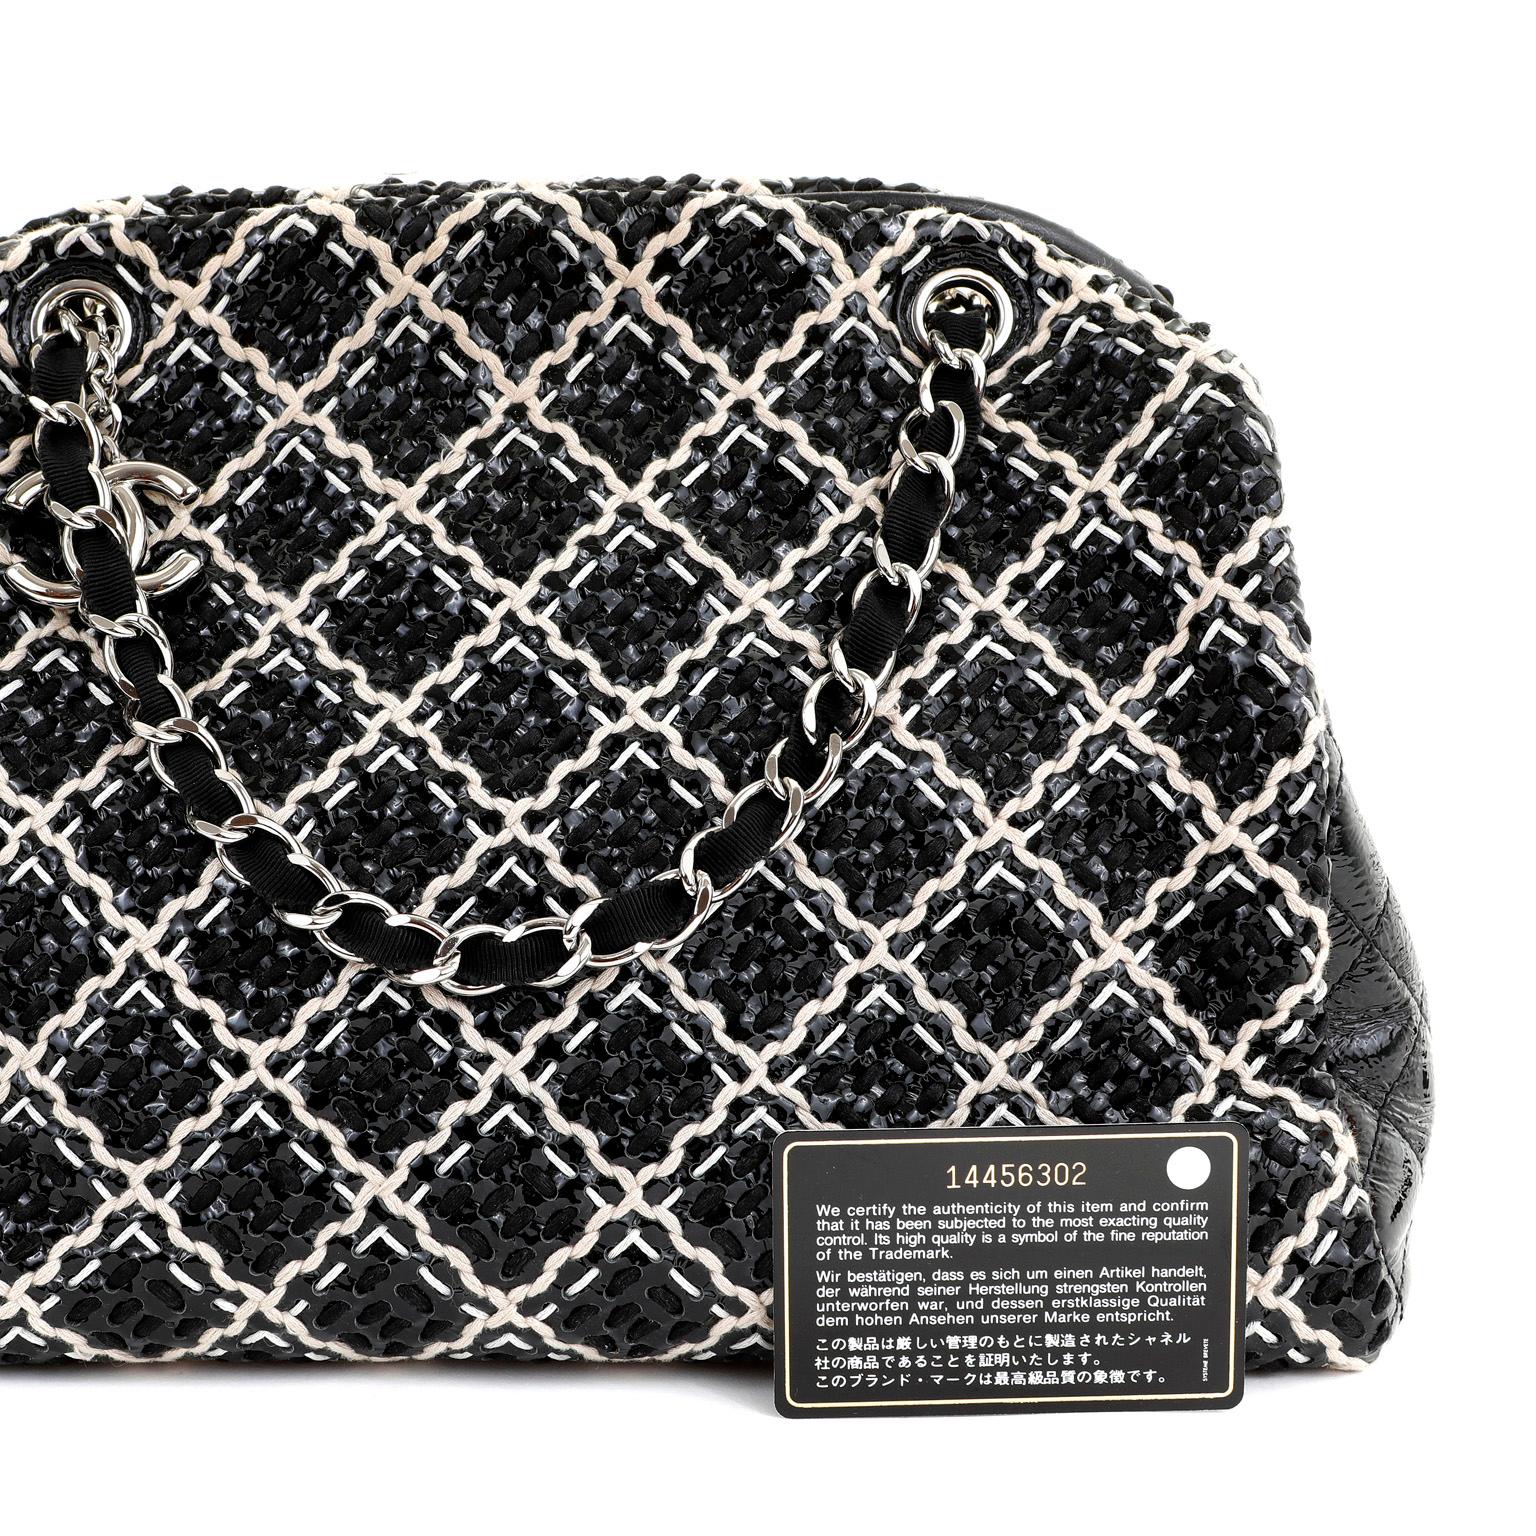 Chanel Black and Beige Tweed Patent Leather Just Mademoiselle Bag For Sale 4